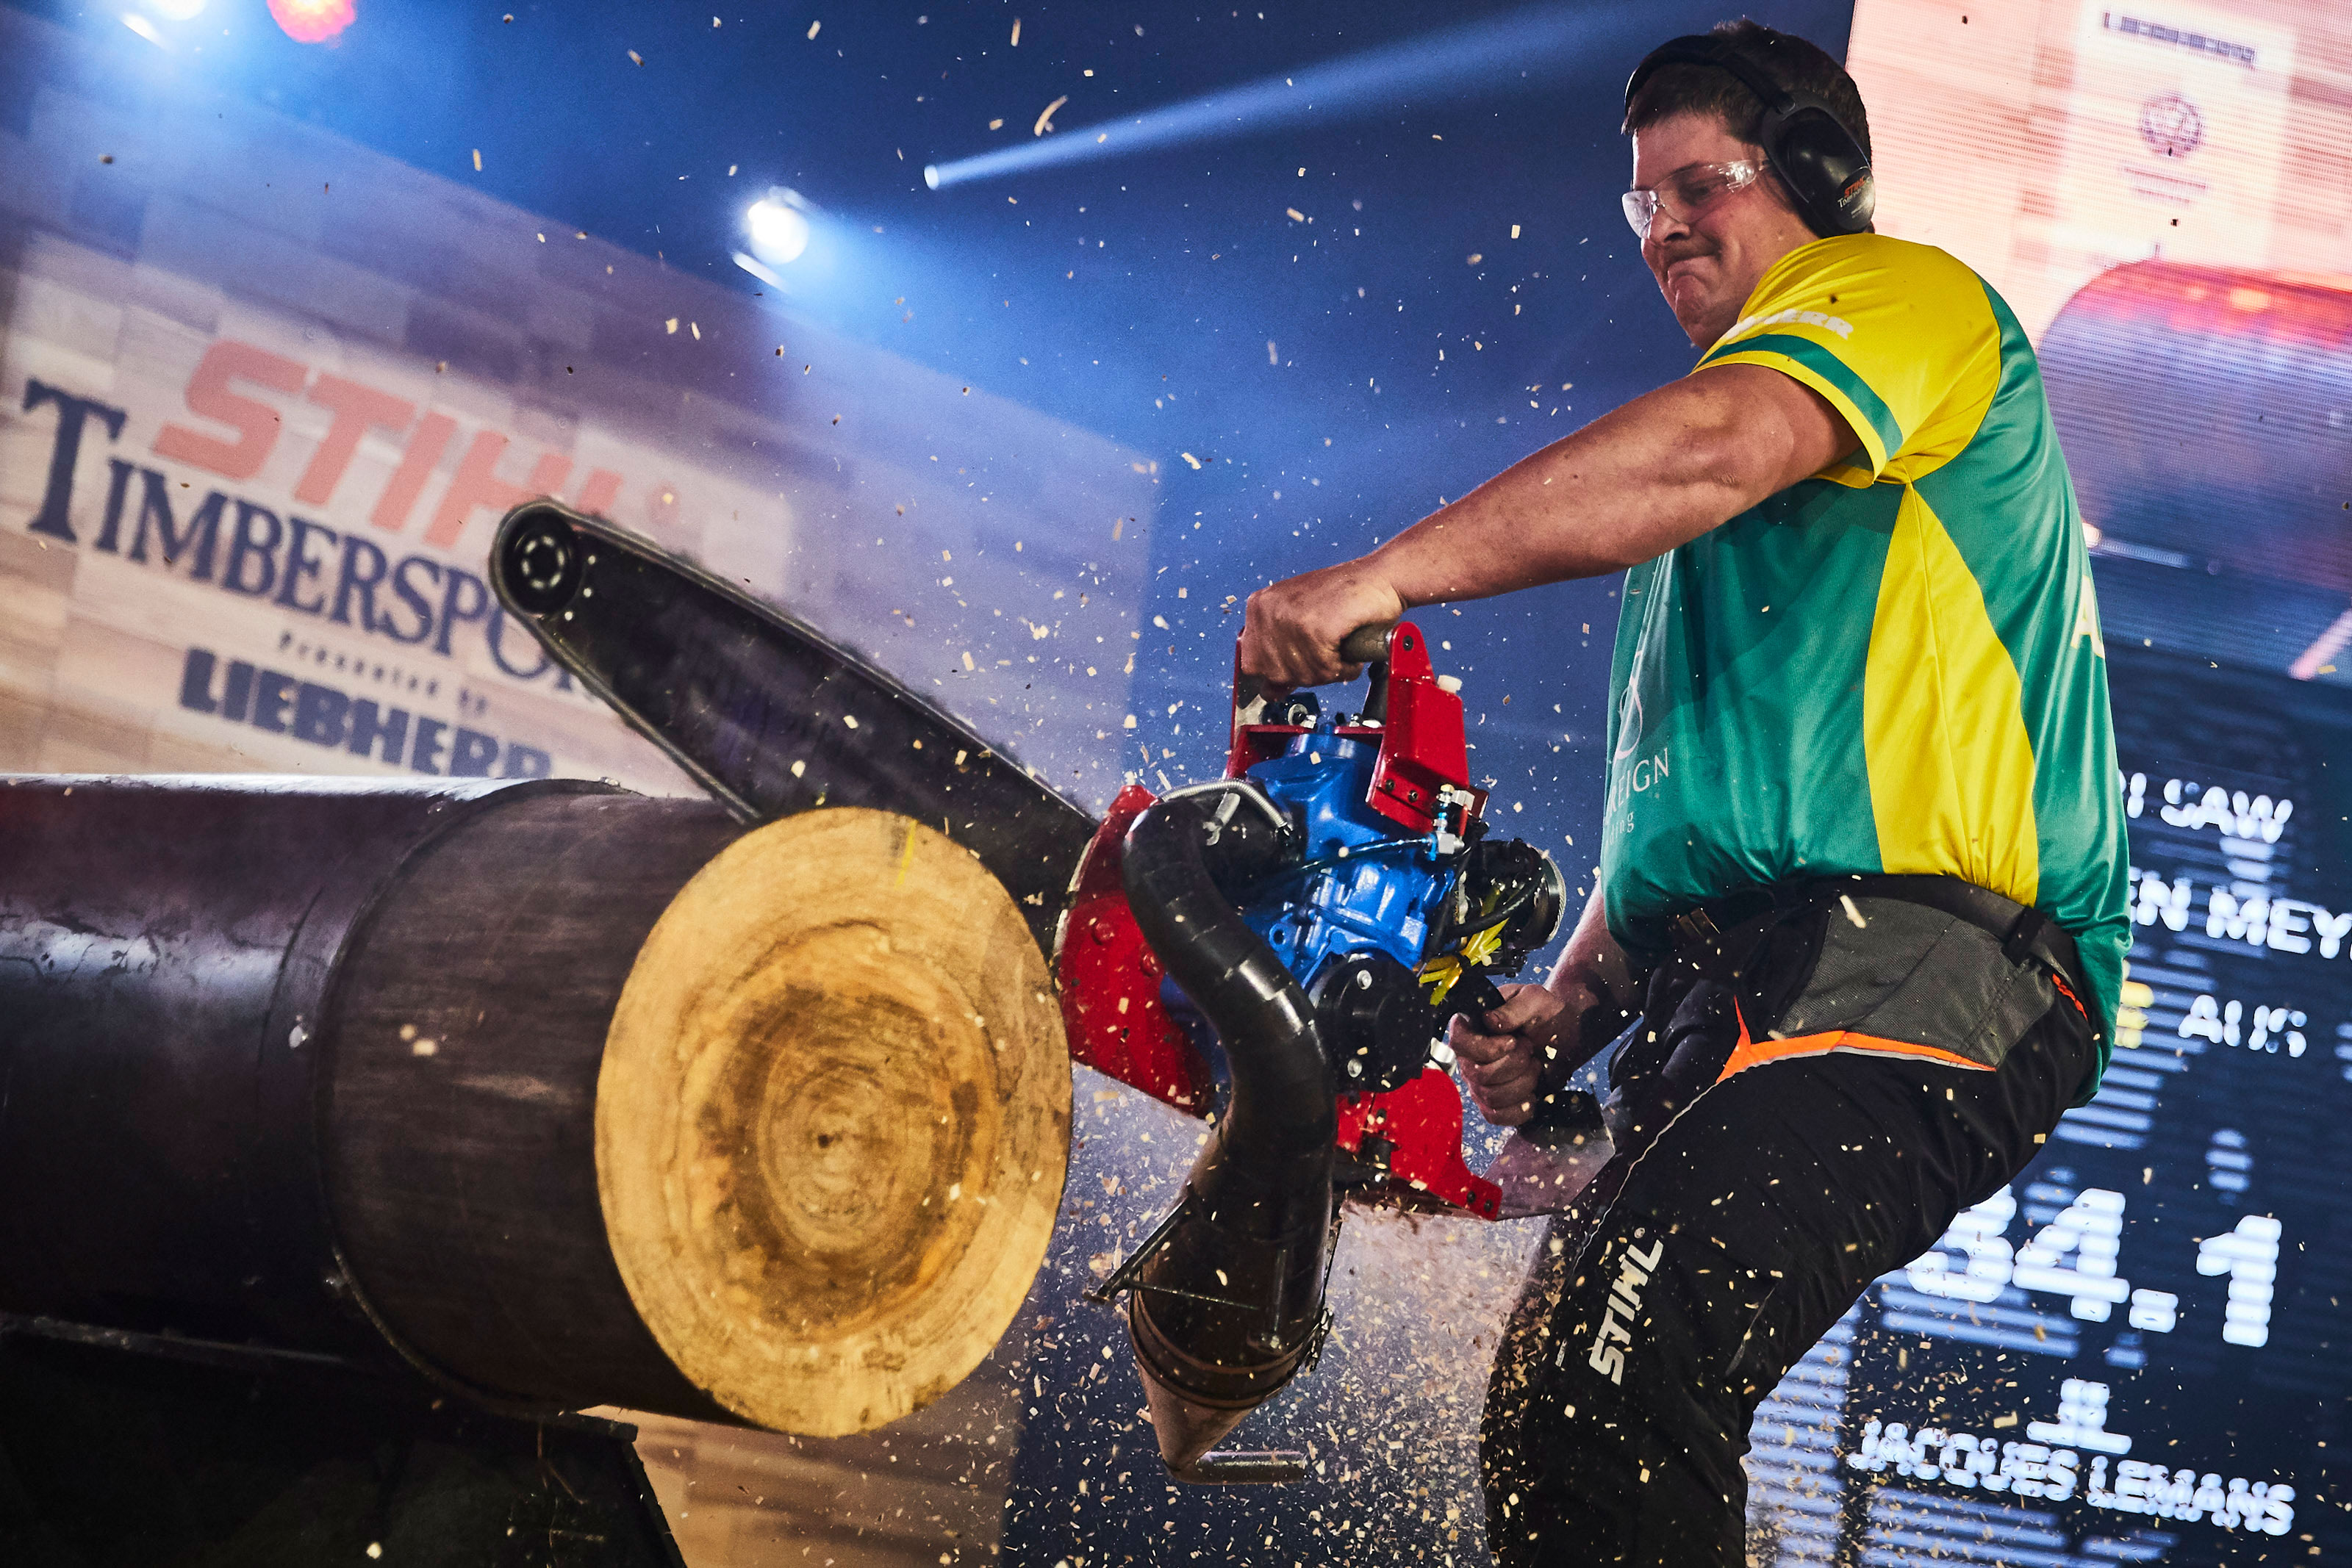 STIHL TIMBERSPORTS® 2019 Individual World Champion Brayden Meyer from Australia making the winning cut with his Hot Saw 